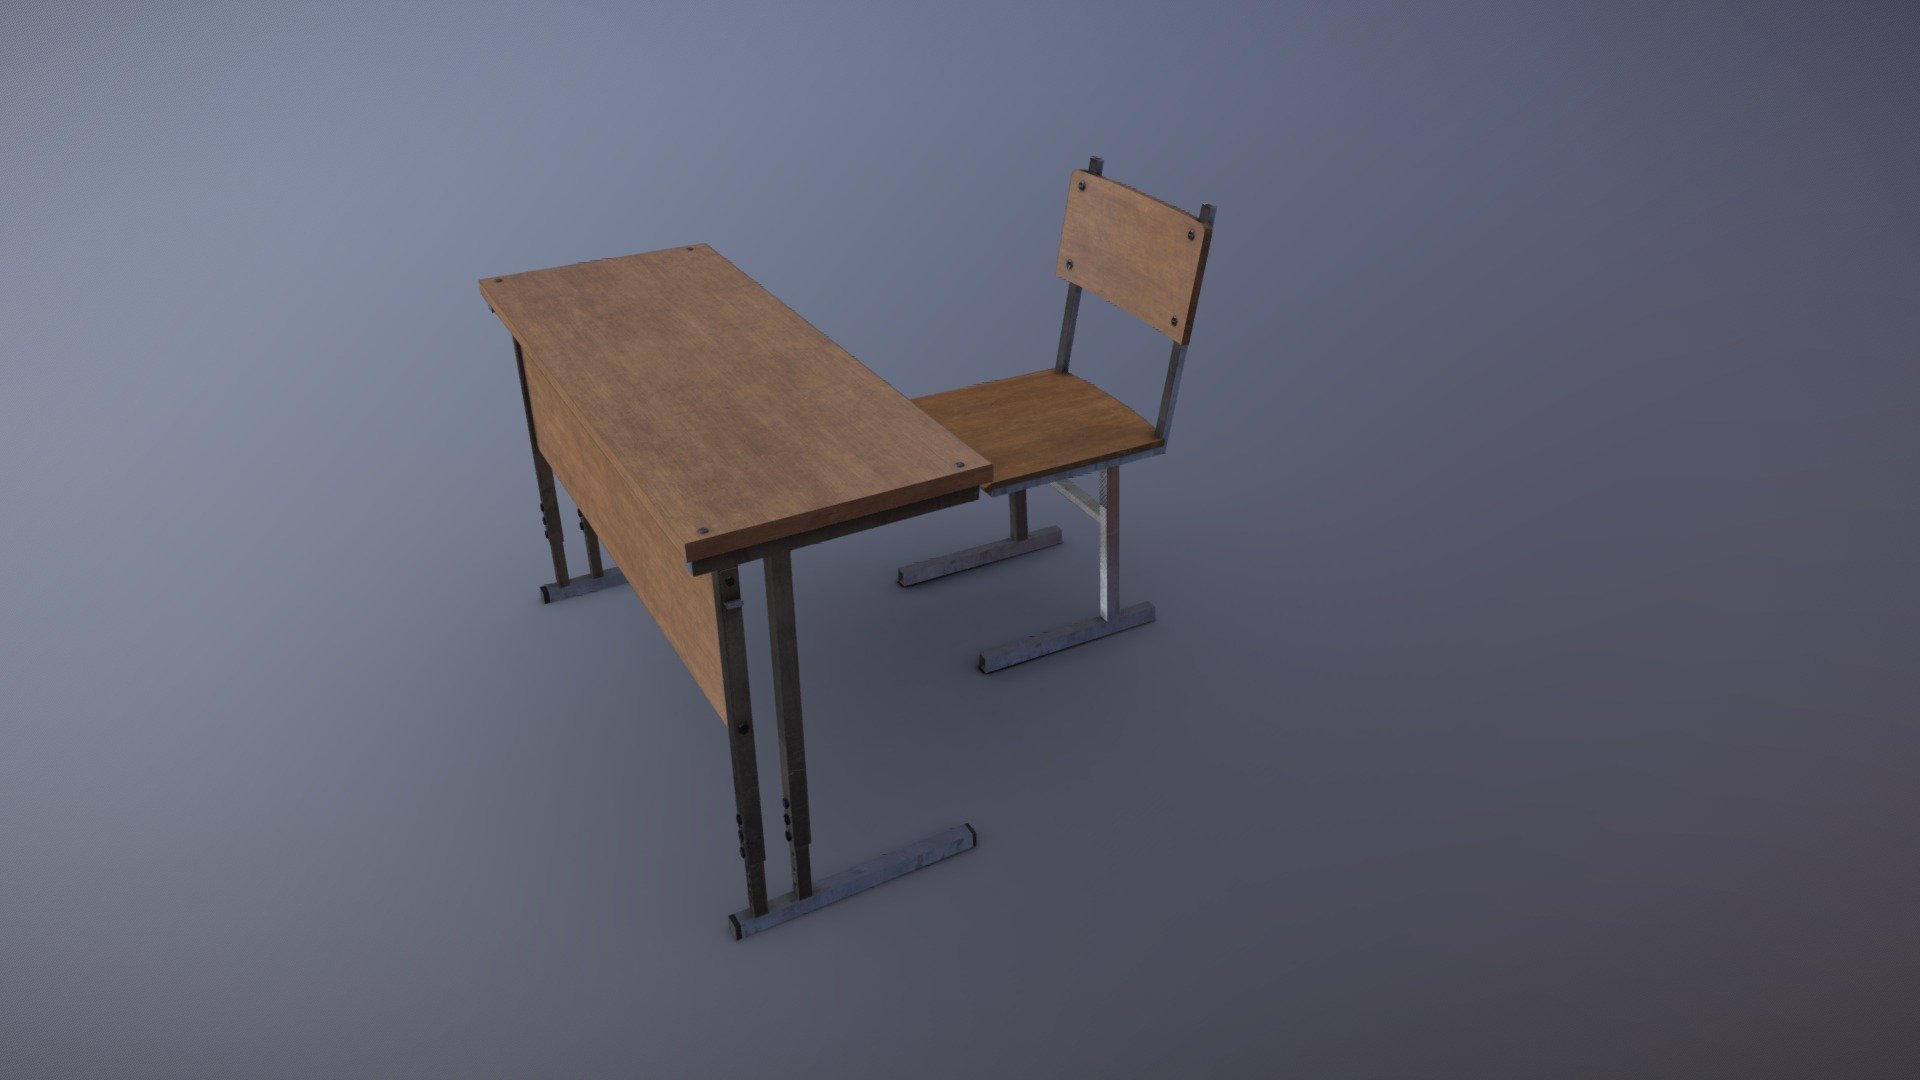 Making an anime scene, with cel shading and all simple textures, but made  this in the meantime with all the maps present - School desk and chair - 3D model by Sord (@alexandersord) 3d model